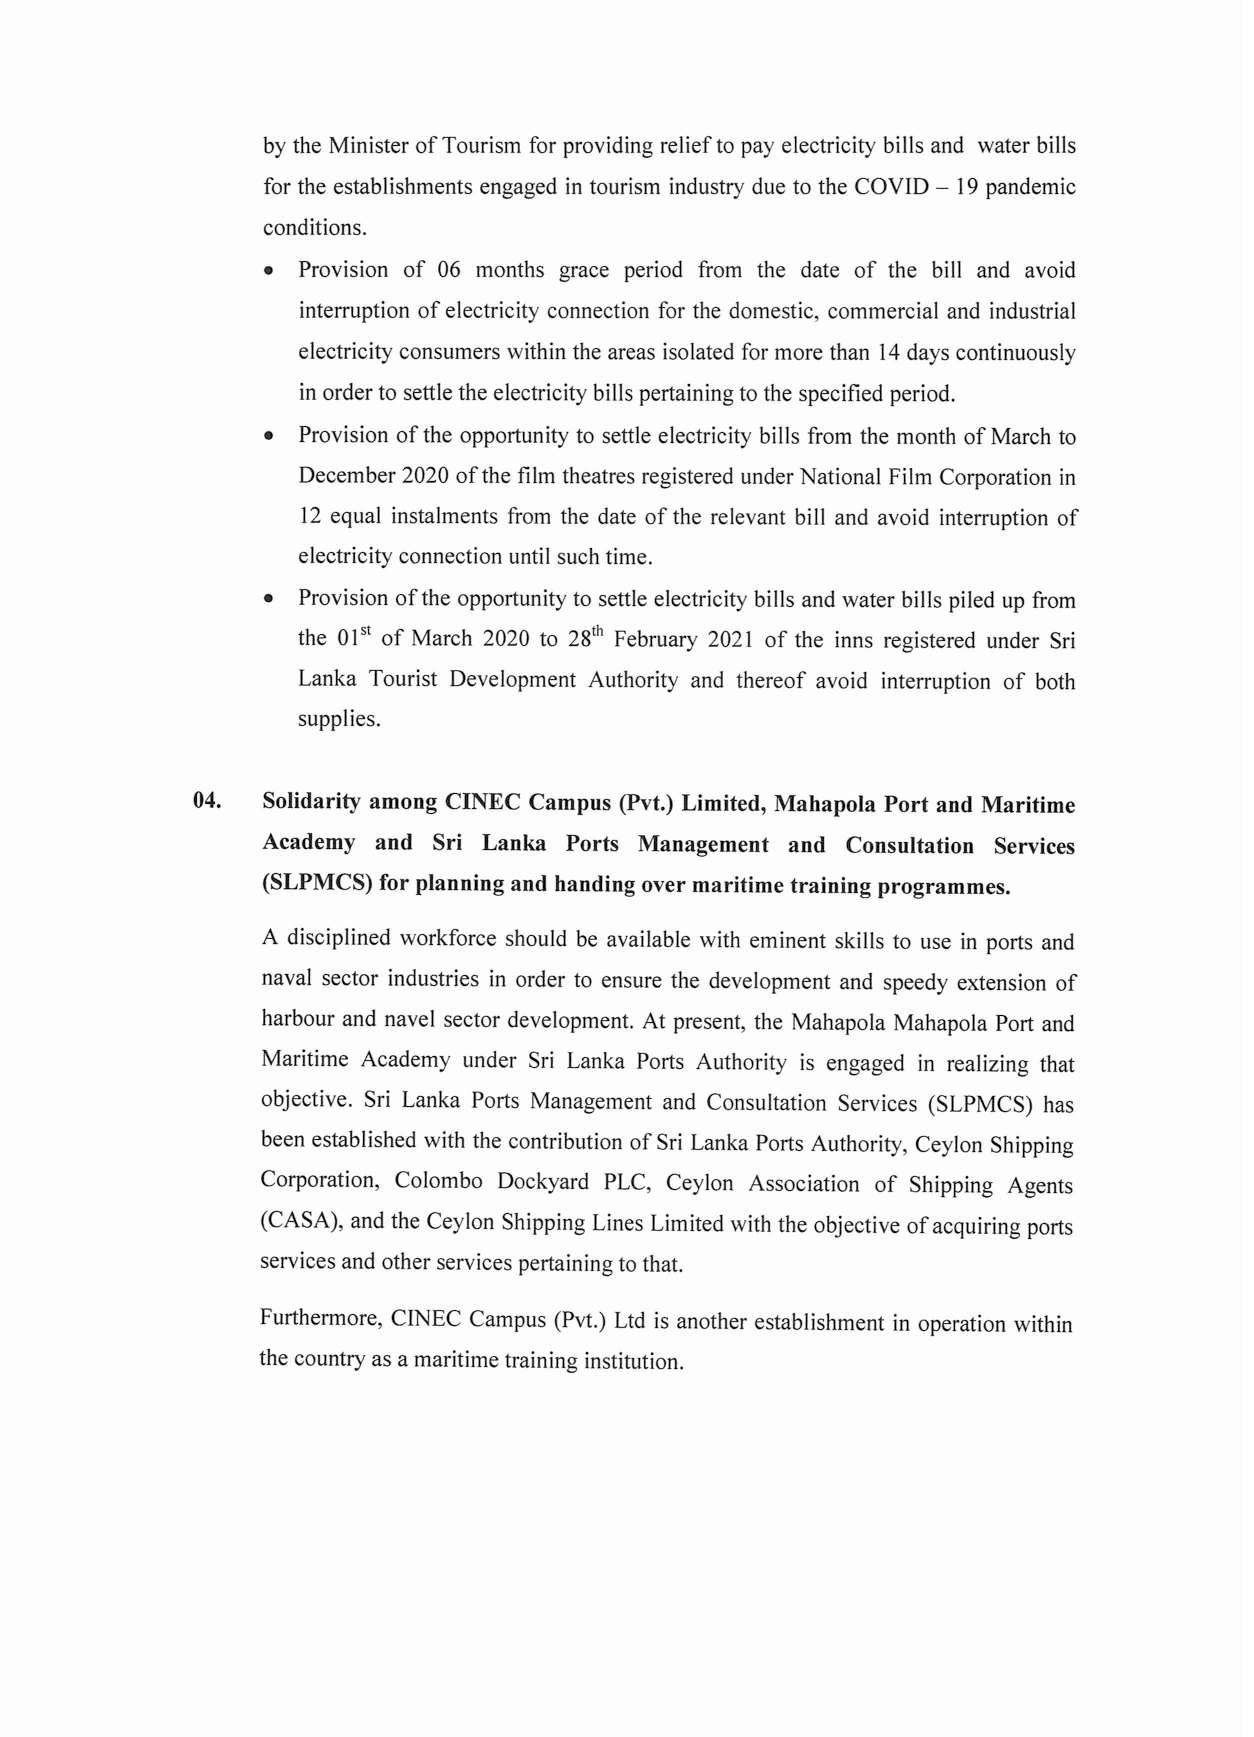 Cabinet Decision on 18.01.2021 English page 002